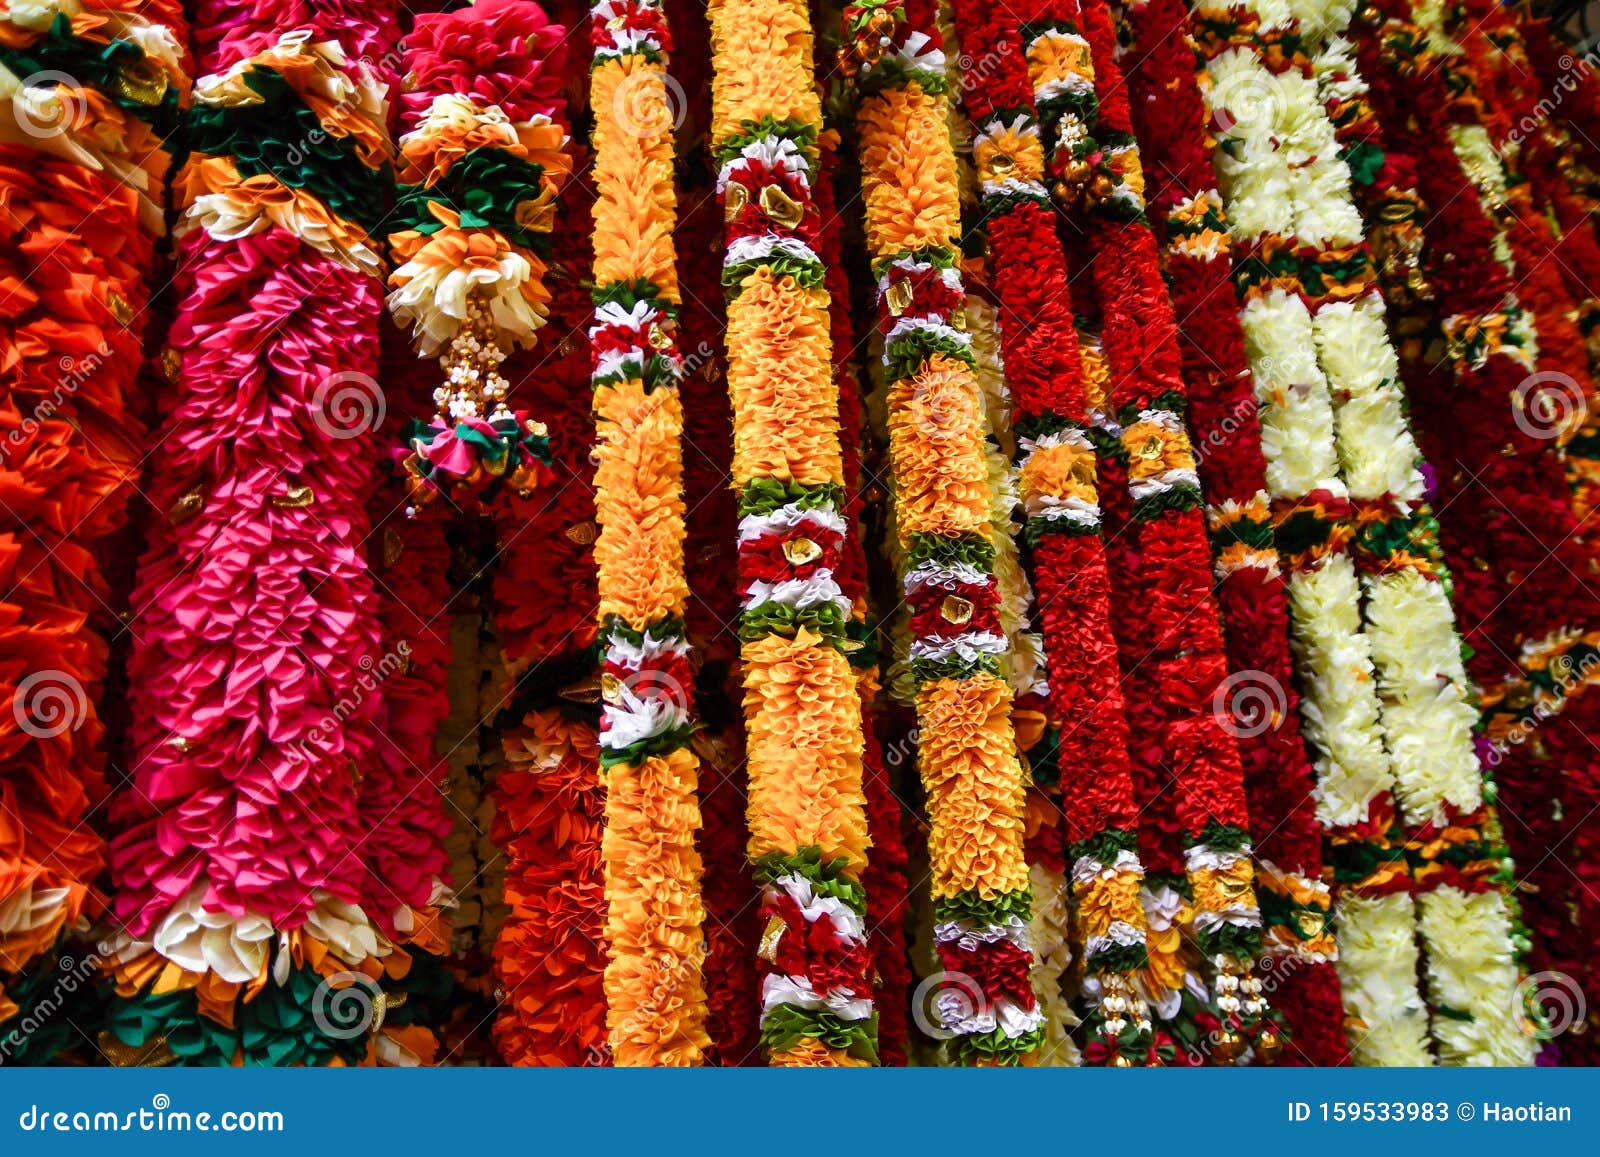 Colorful Flower Garlands Sold in Singapore Stock Image - Image of ...